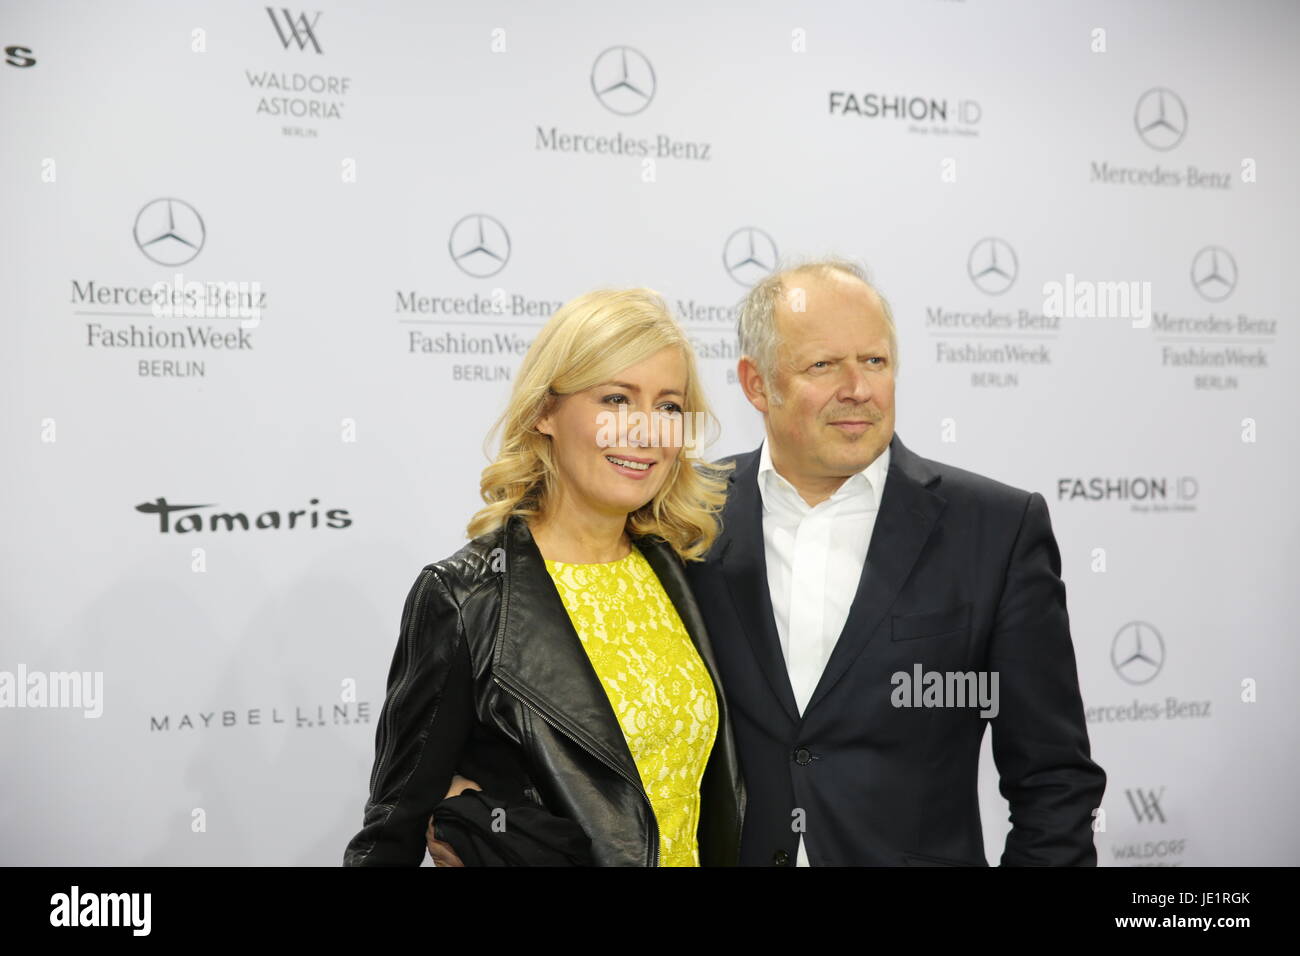 Berlin, Germany, January 19th, 2015: Laurel runway red carpet arrivals on Mercedes-Benz Fashion Week. Stock Photo